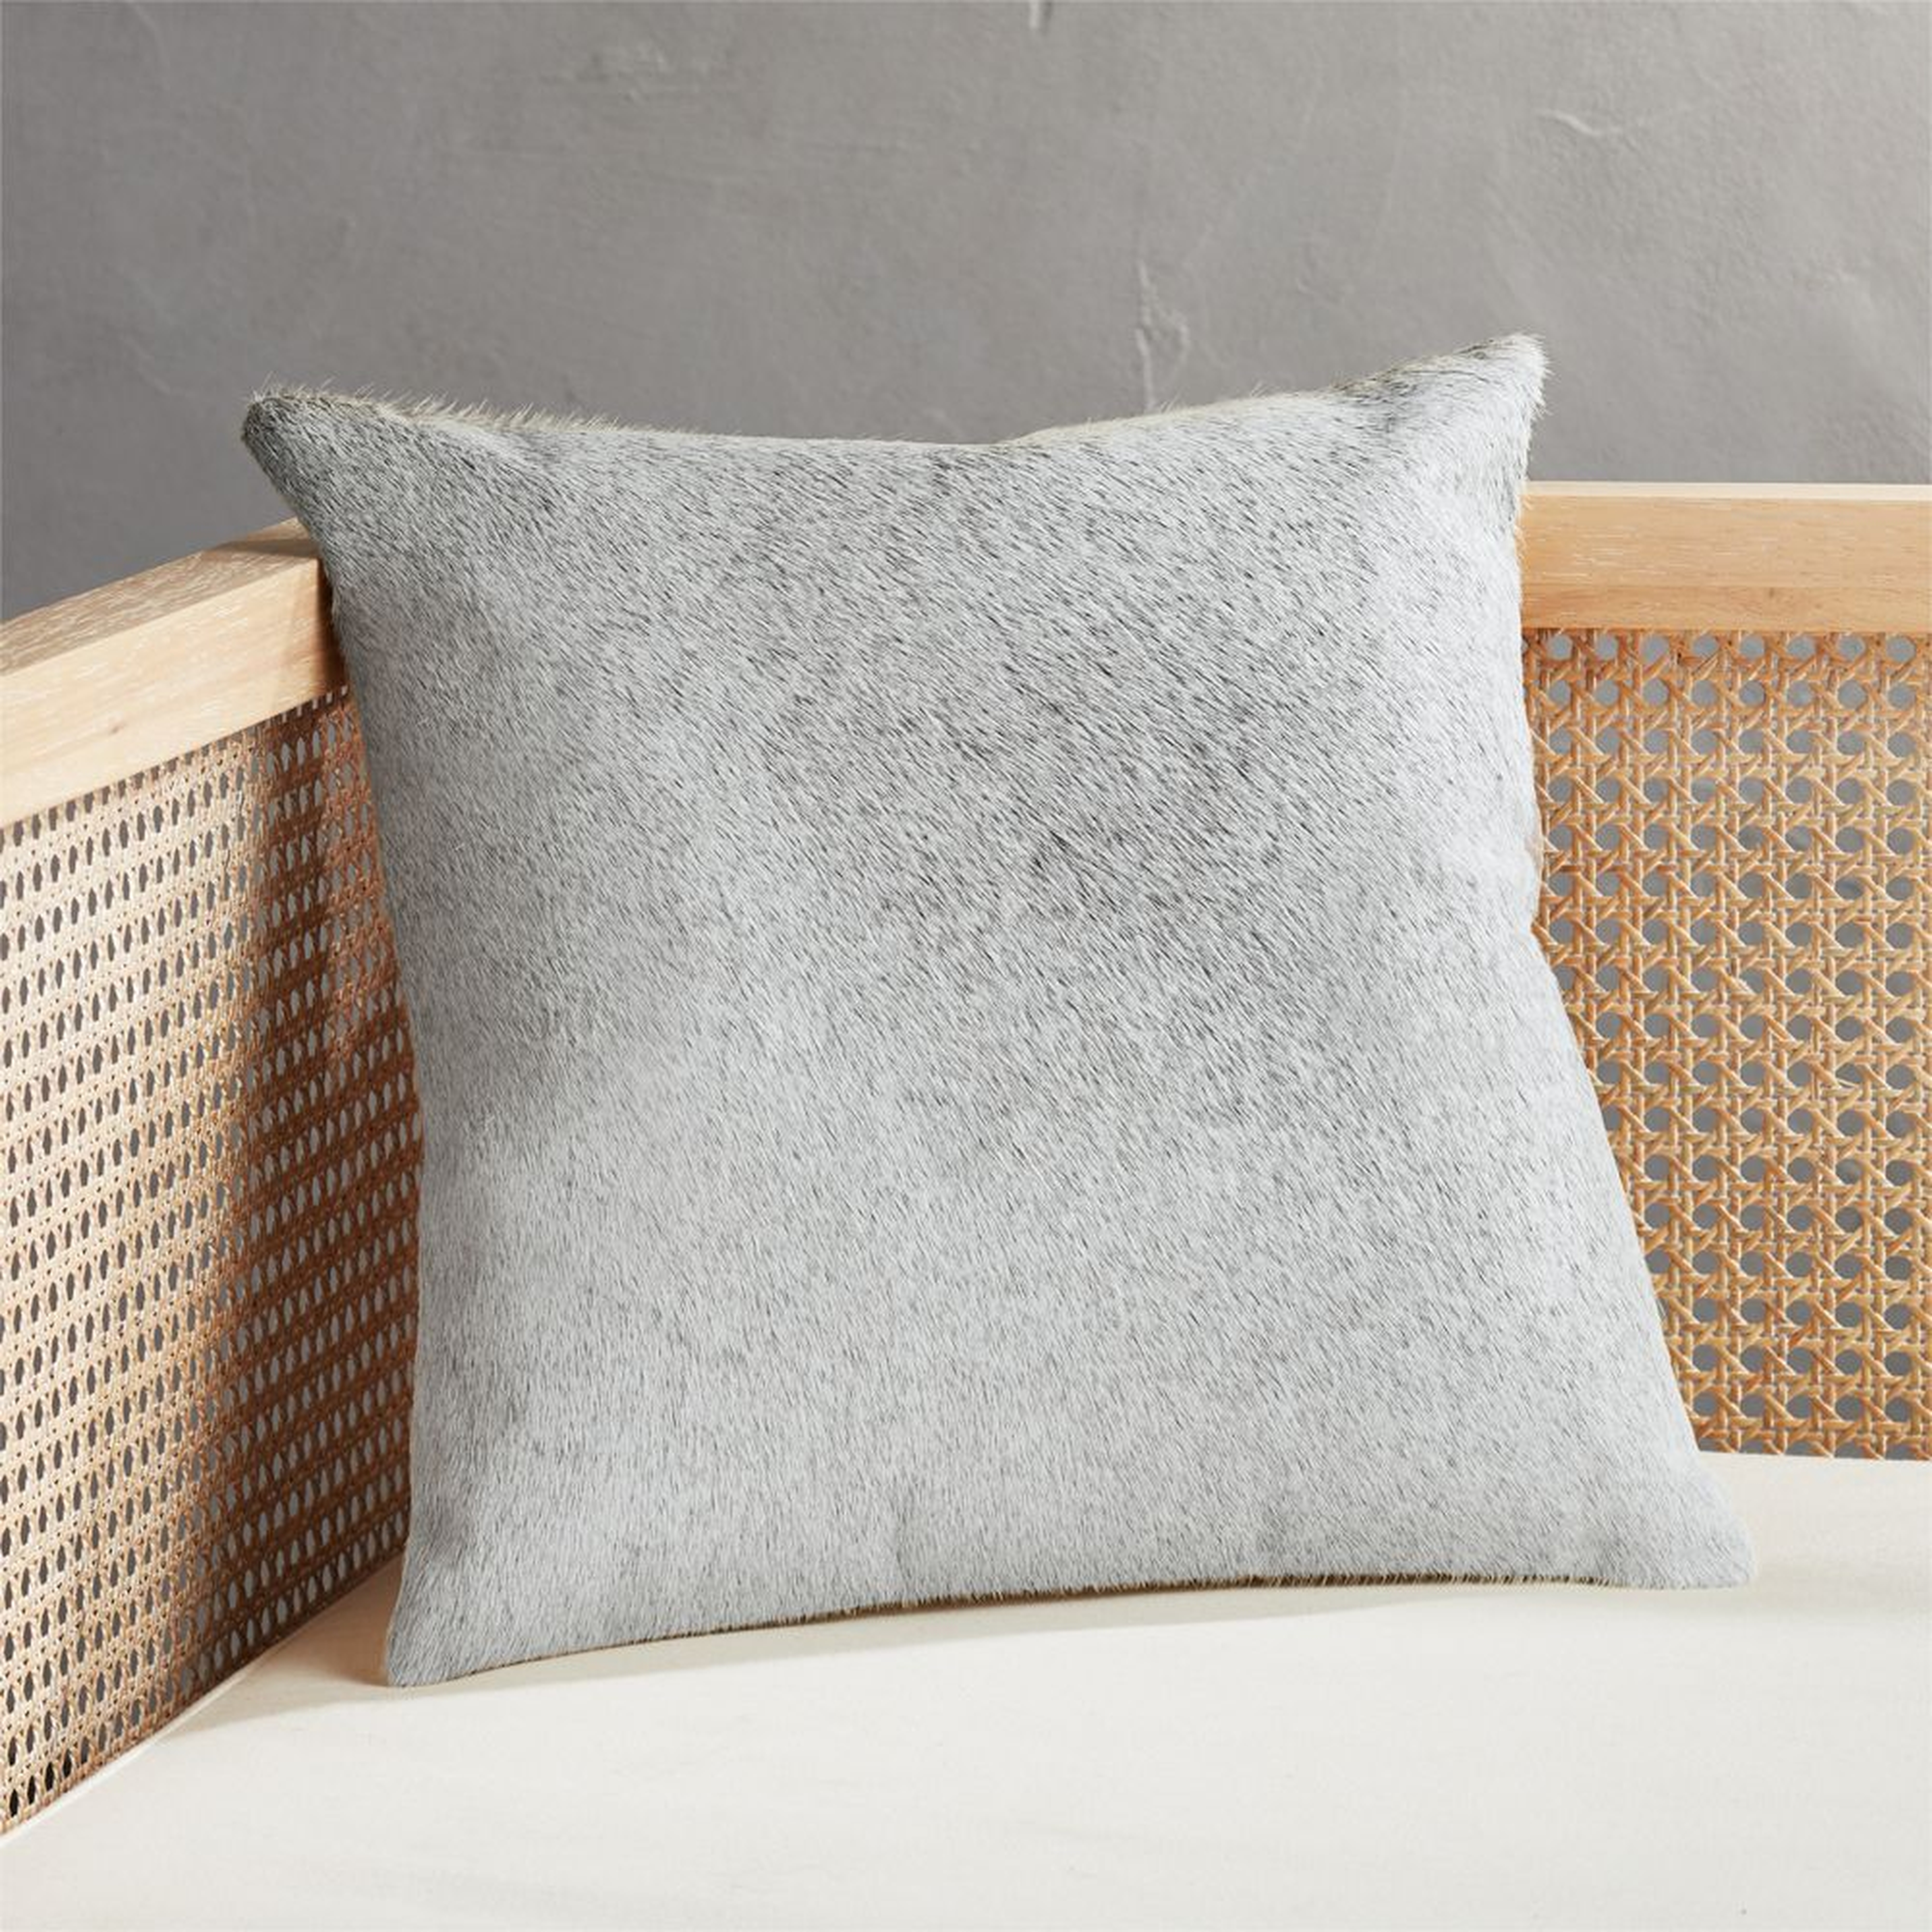 16" Grey and Neutral Cowhide Pillow with Feather-Down Insert - CB2